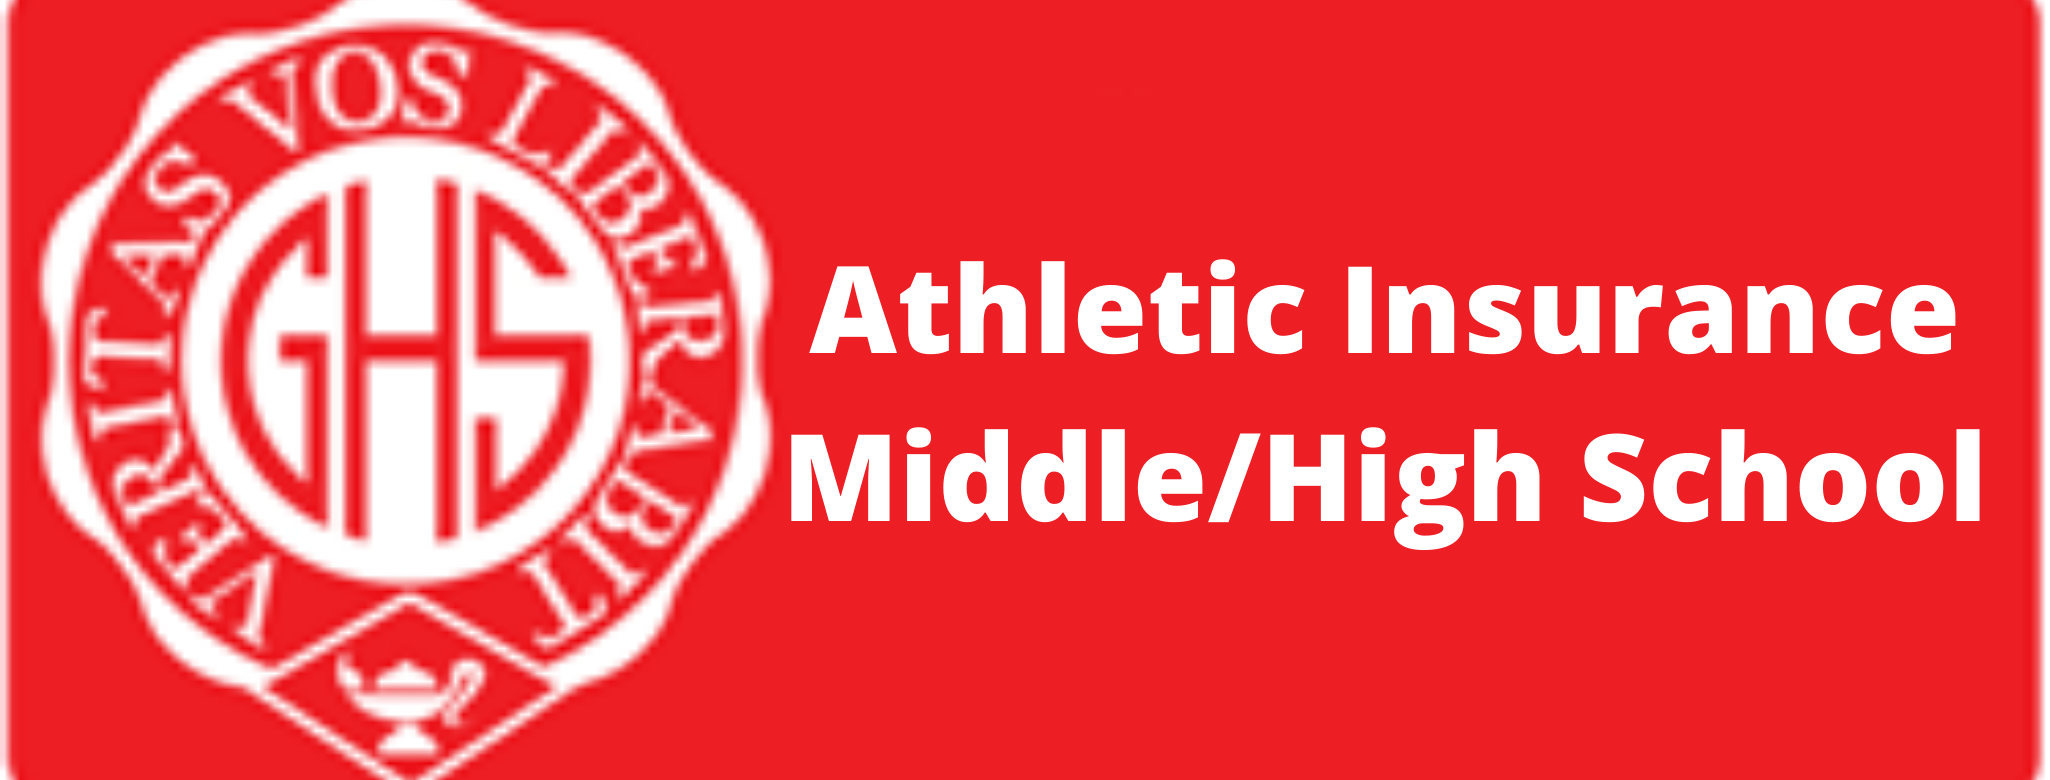 Athletic Insurance - Middle/High School